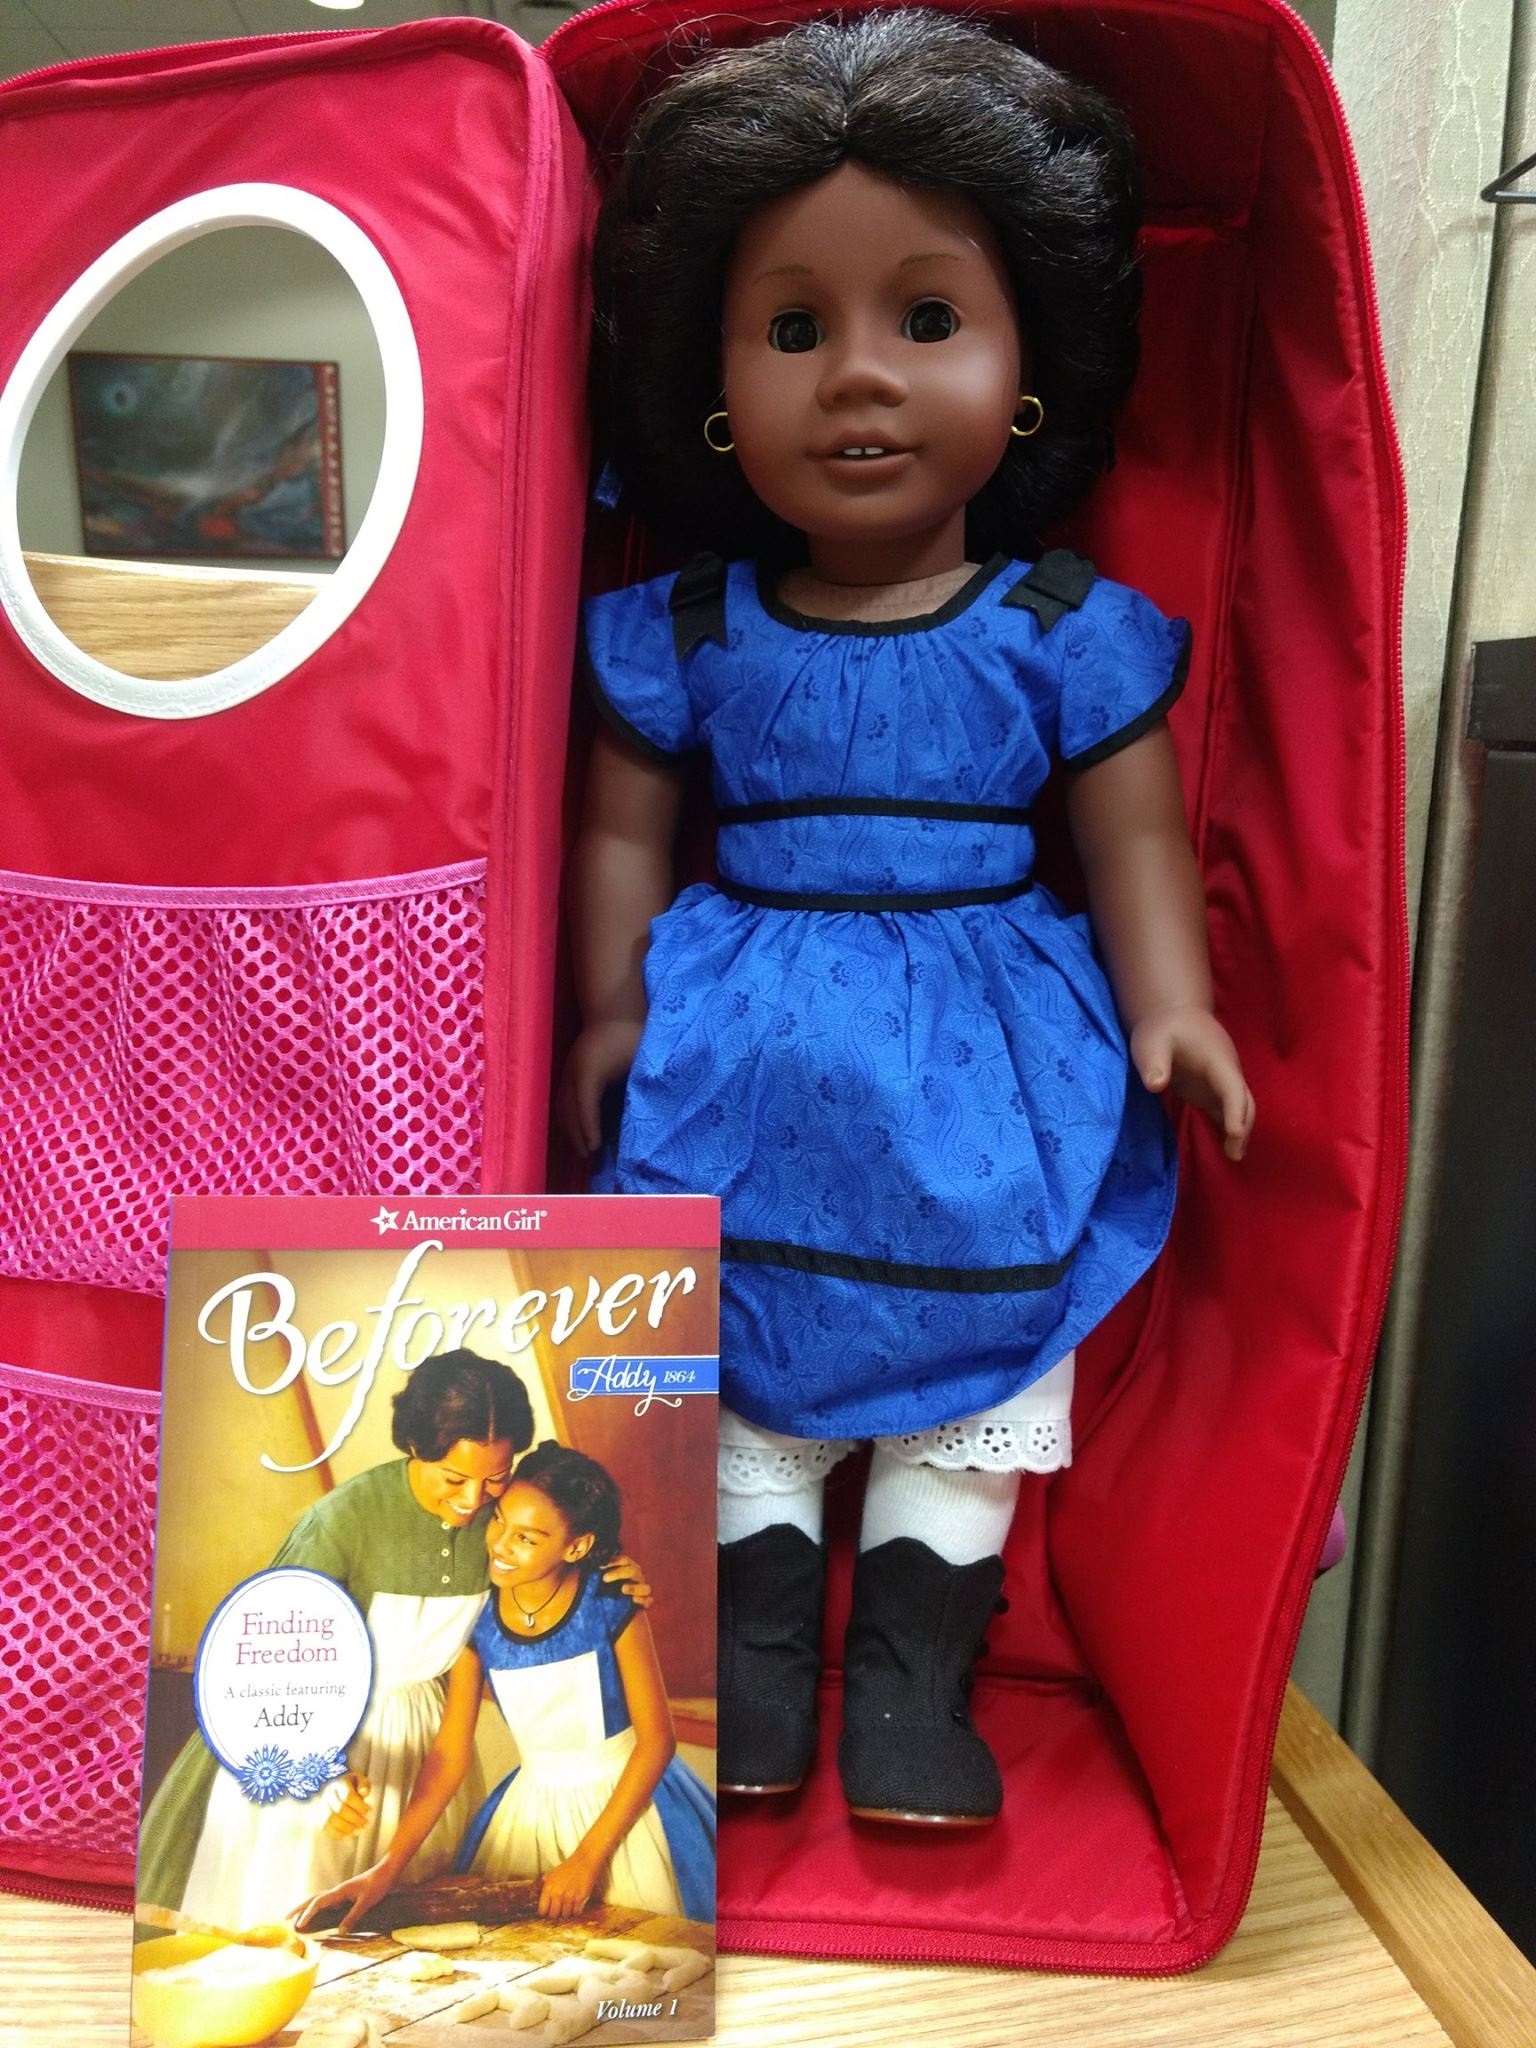 PHOTO: An American Girl doll available to be checked out at a Yonkers Public Library is pictured here.